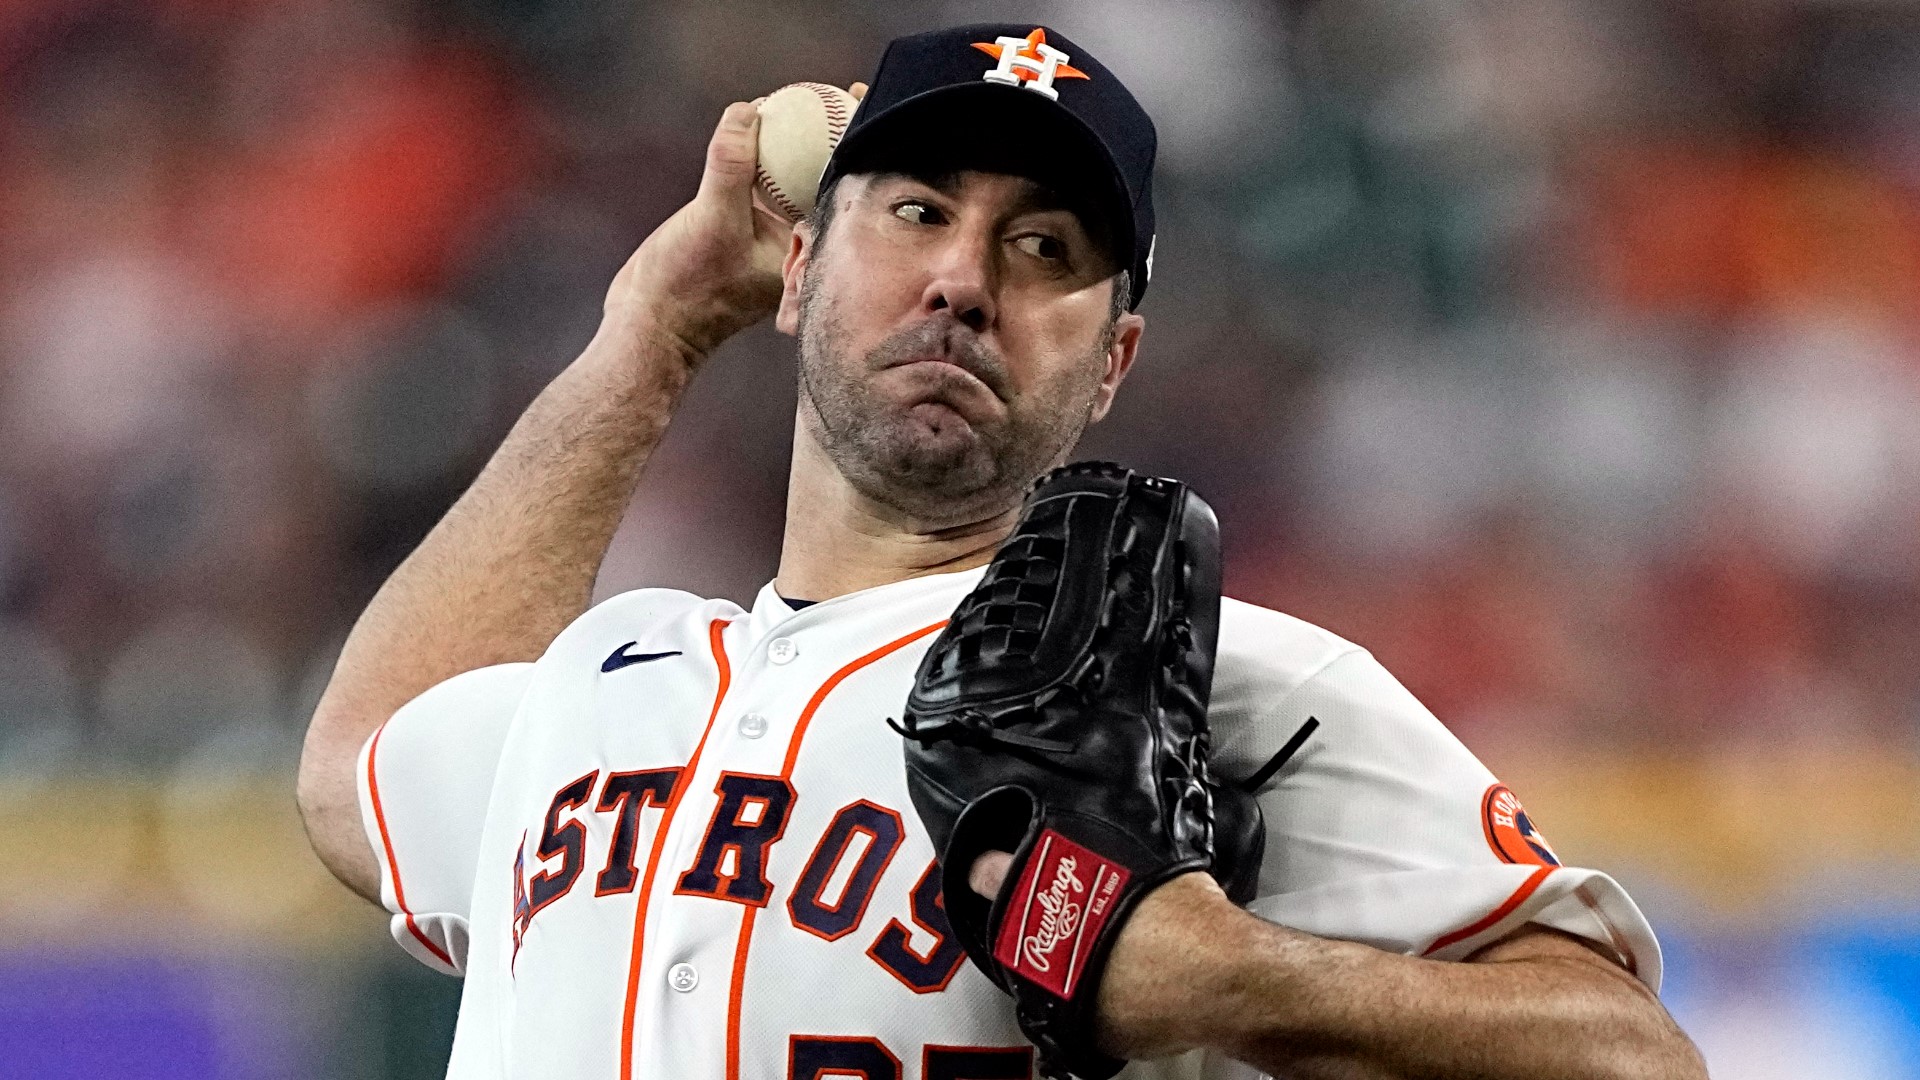 Verlander comes off winning his 3rd AL Cy Young Award and AL Comeback Player Of The Year after missing nearly 2 years following Tommy John surgery.